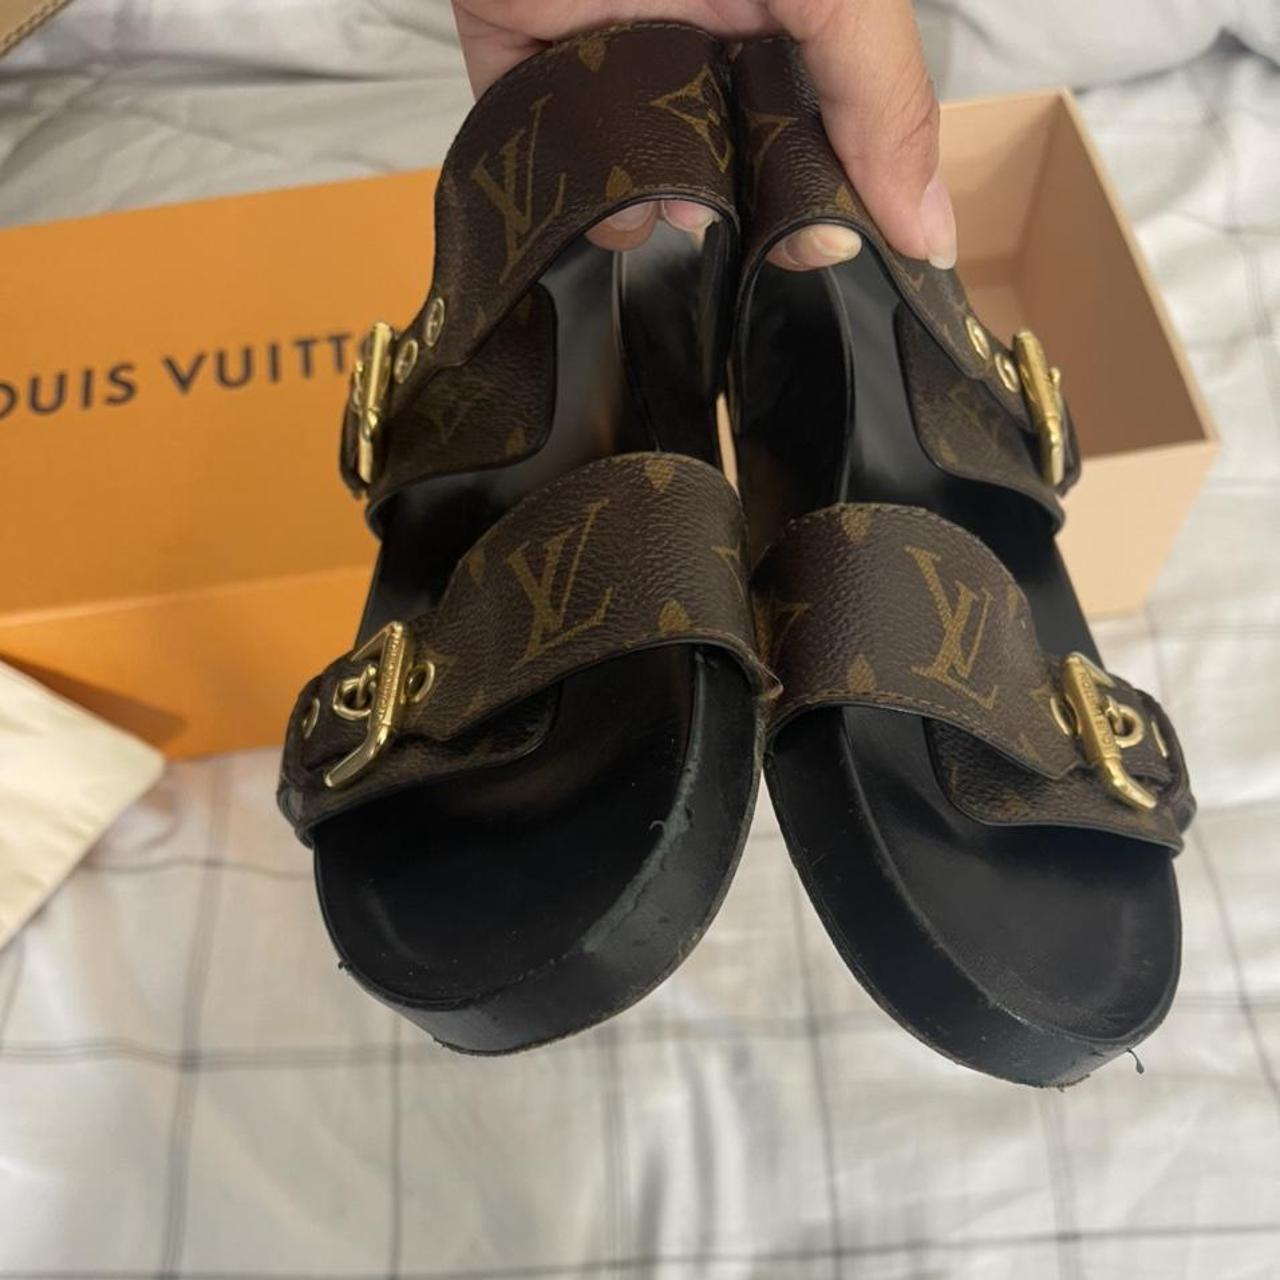 Shop the Latest Louis Vuitton Sandals in the Philippines in July 2023